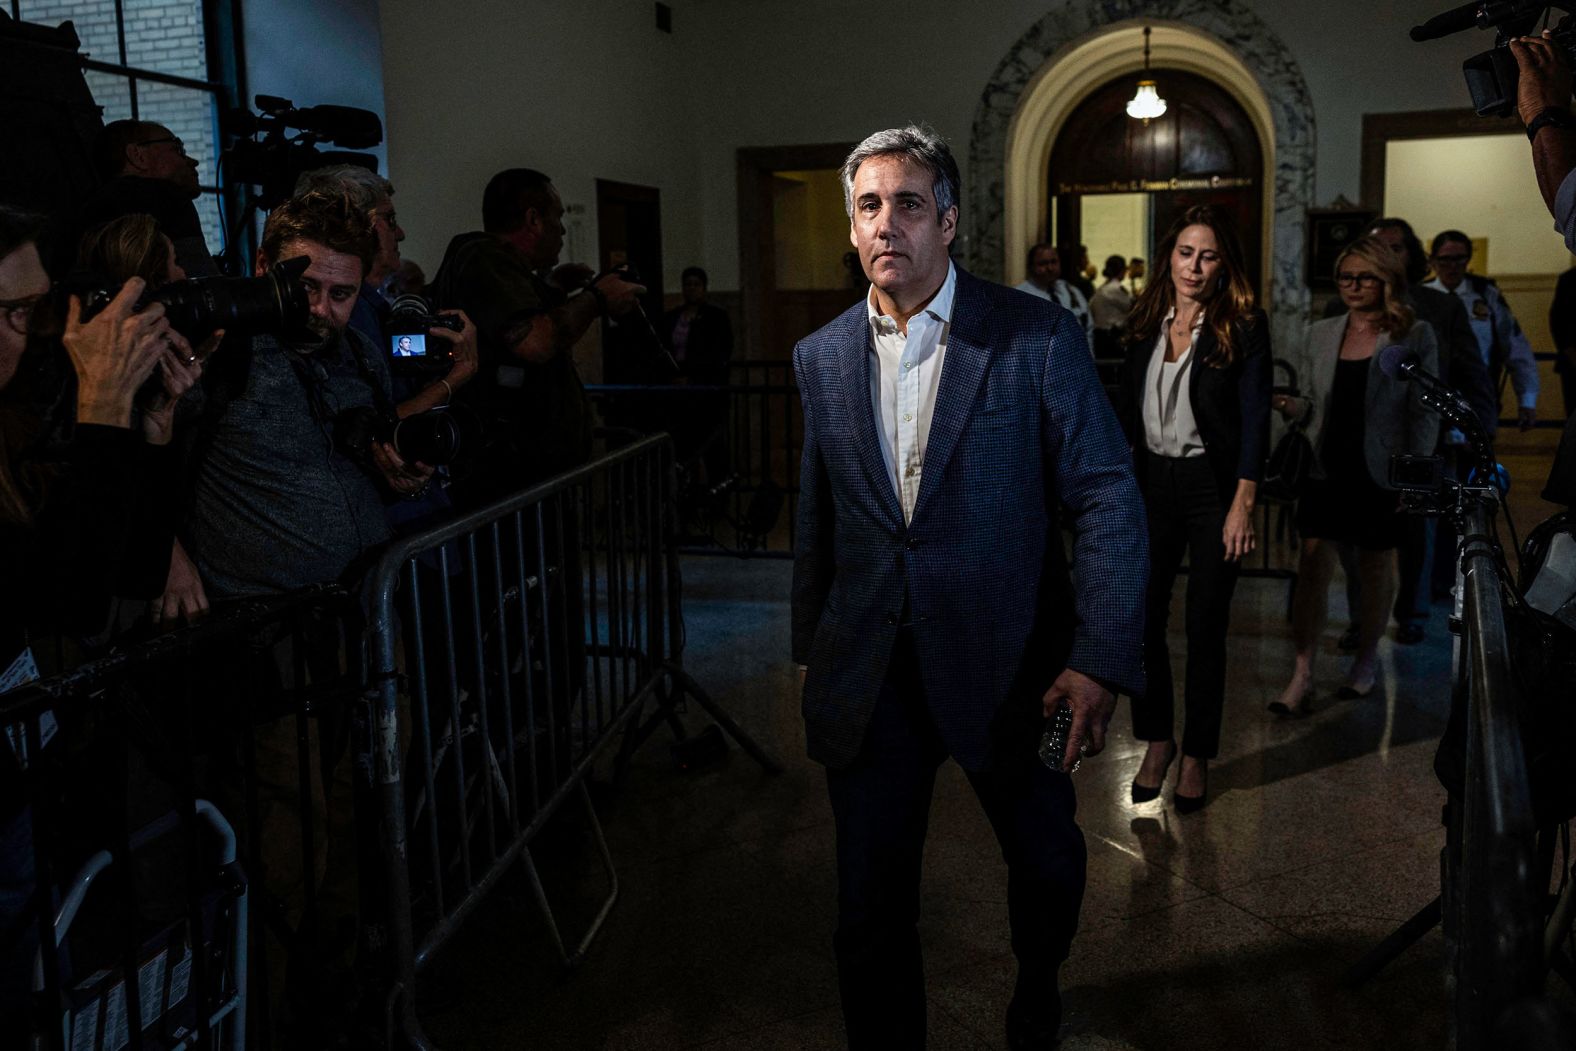 Michael Cohen, Donald Trump's one-time lawyer and fixer, leaves the courtroom after <a href="index.php?page=&url=https%3A%2F%2Fwww.cnn.com%2F2023%2F10%2F24%2Fpolitics%2Ftakeaways-michael-cohen-donald-trump%2Findex.html" target="_blank">testifying</a> against Trump on October 24. Cohen's testimony directly implicated the former president, saying he was directed by his former boss to inflate Trump's net worth on financial statements to hit an arbitrary number.